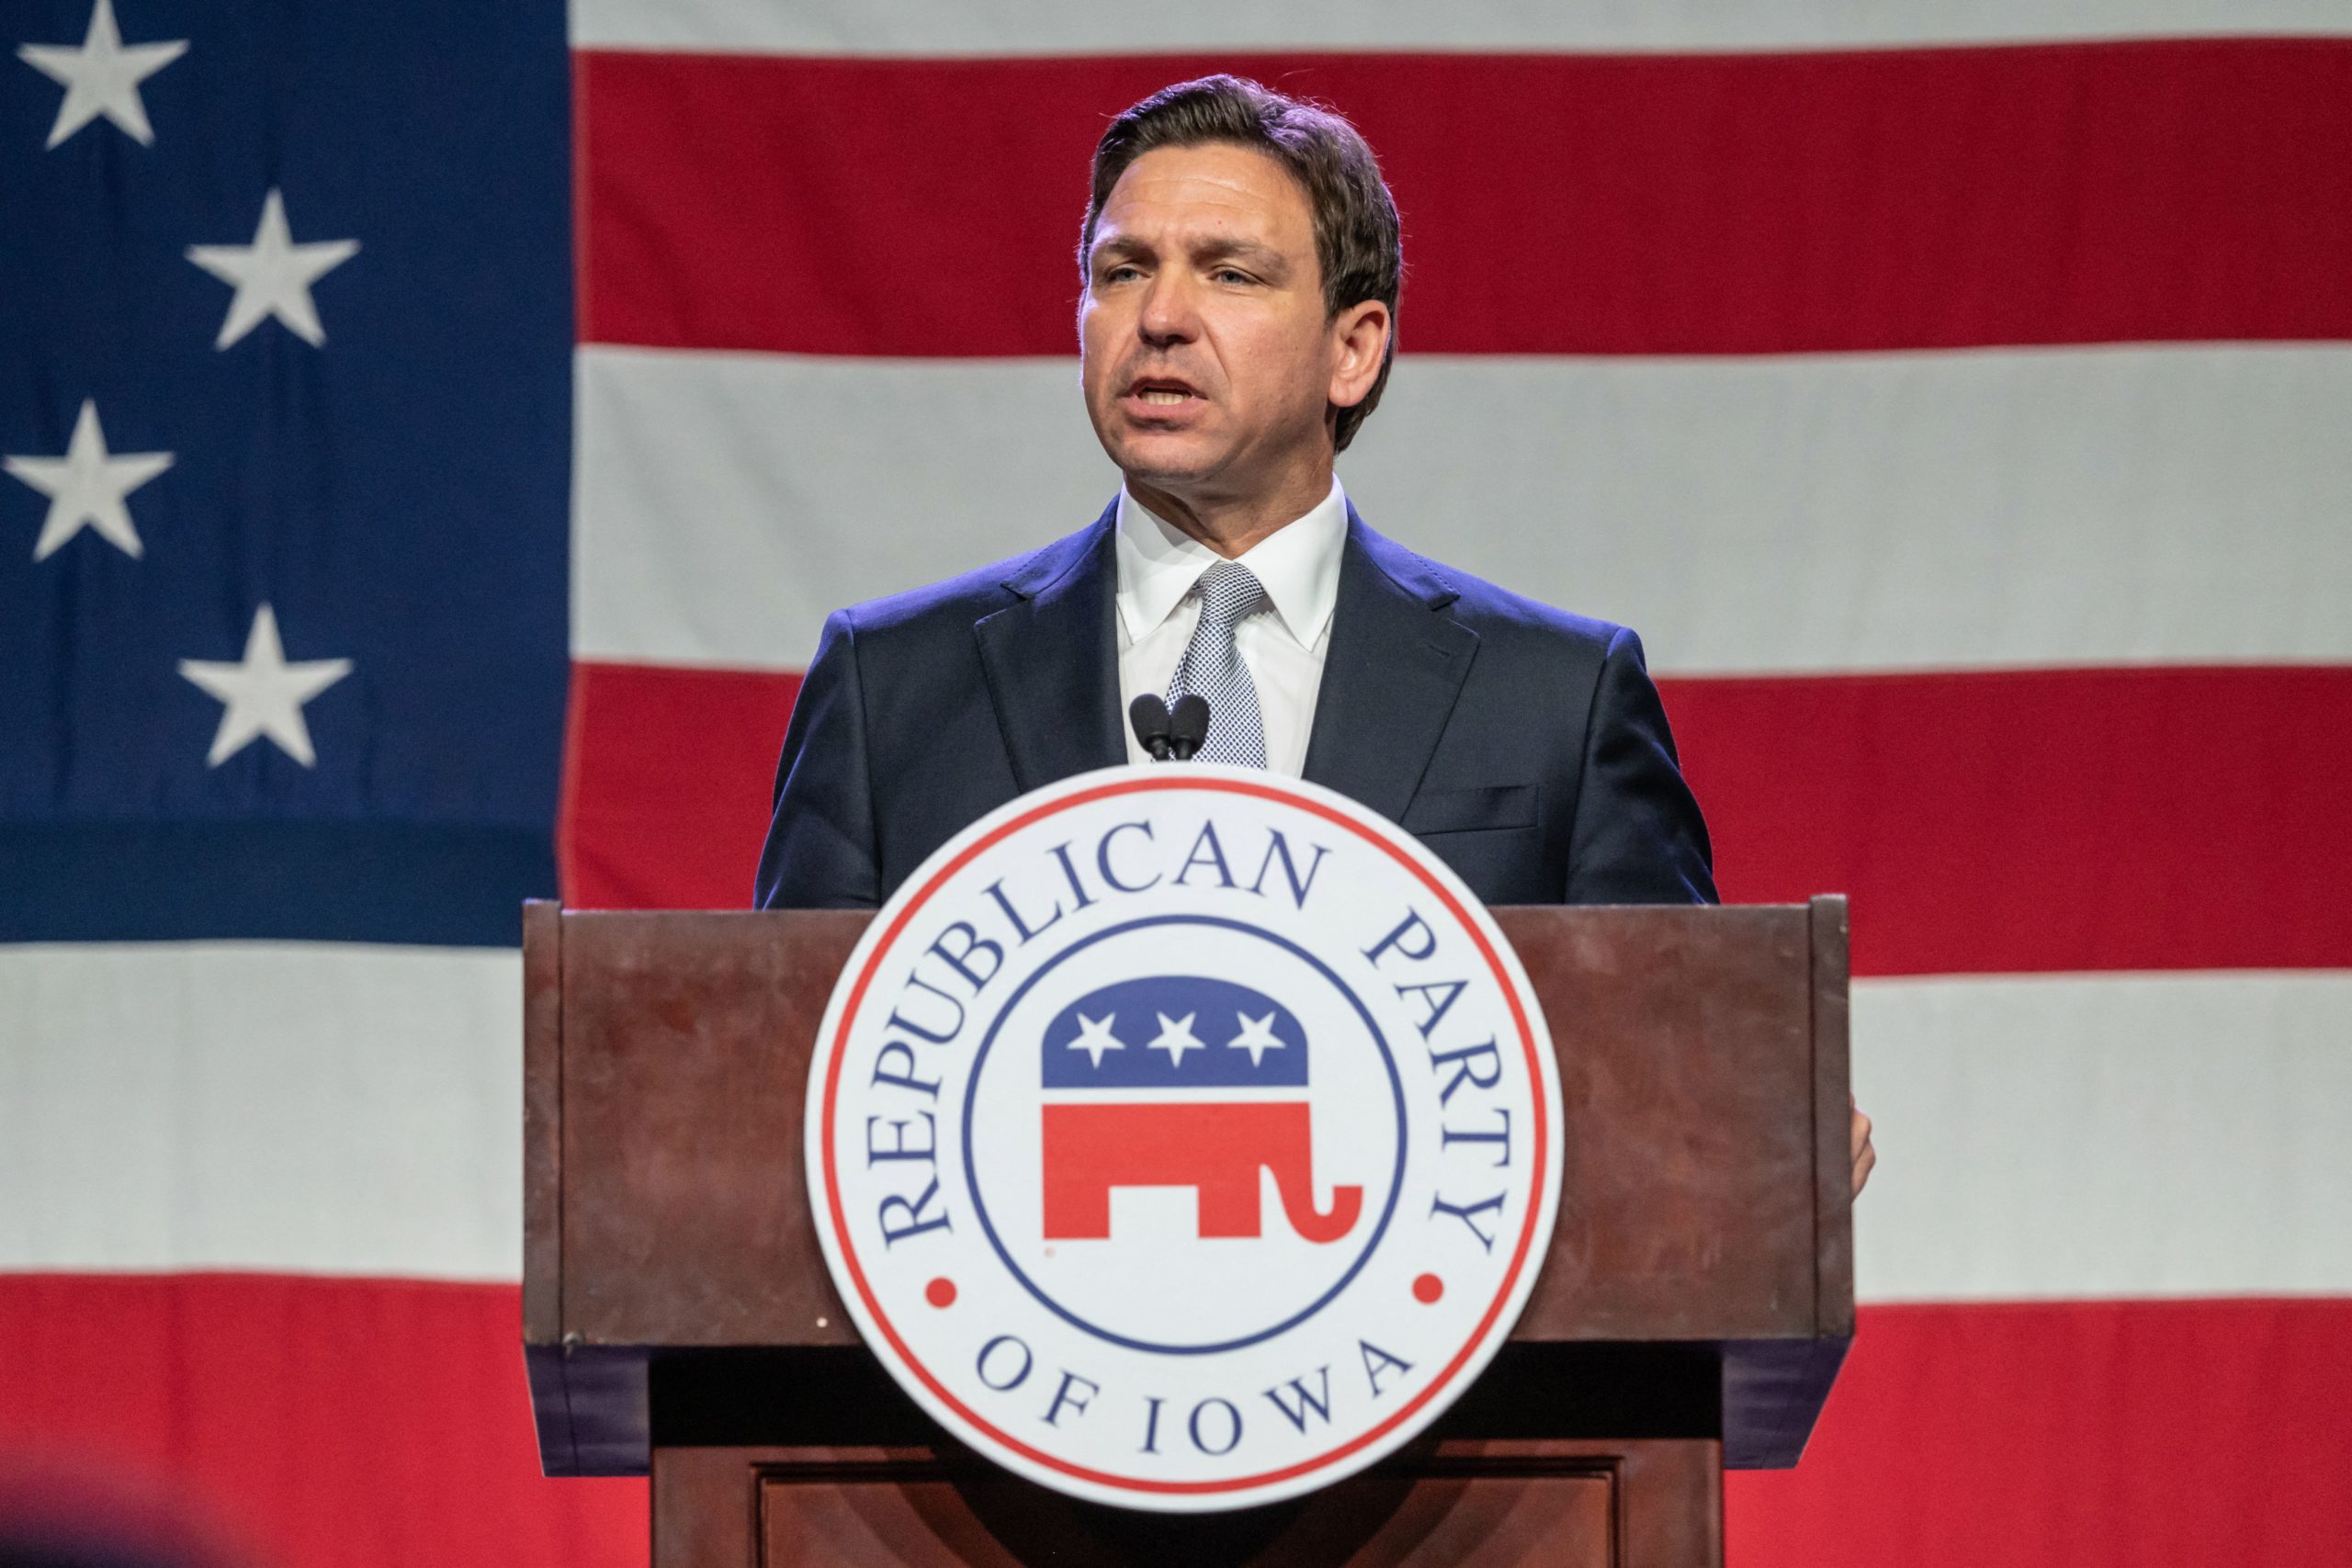 Florida Governor and 2024 Republican Presidential hopeful Ron DeSantis speaks at the Republican Party of Iowa's 2023 Lincoln Dinner at the Iowa Events Center in Des Moines, Iowa, on July 28, 2023. (Photo by Sergio FLORES / AFP) (Photo by SERGIO FLORES/AFP via Getty Images)